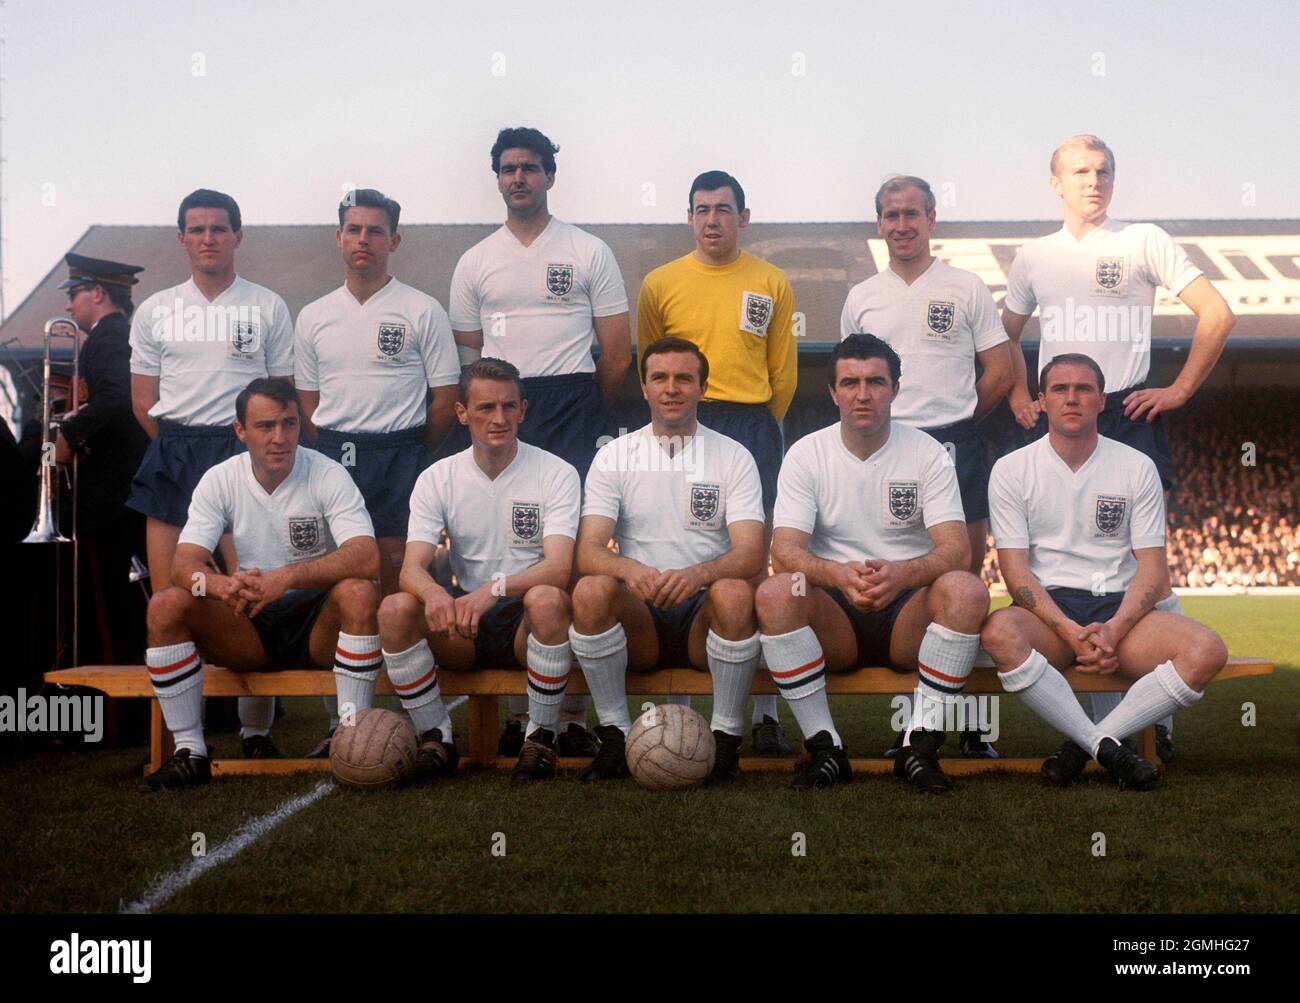 Foto del file datata 12-10-1963 del gruppo inglese Back Row: Terry Paine, Gordon Milne, Maurice Norman, Gordon Banks, Bobby Charlton e Bobby Moore Front Row: Jimmy Greaves, George Eastham, Jimmy Armfield, Bobby Smith e Ray Wilson Data di emissione: Domenica 19 settembre 2021. Foto Stock